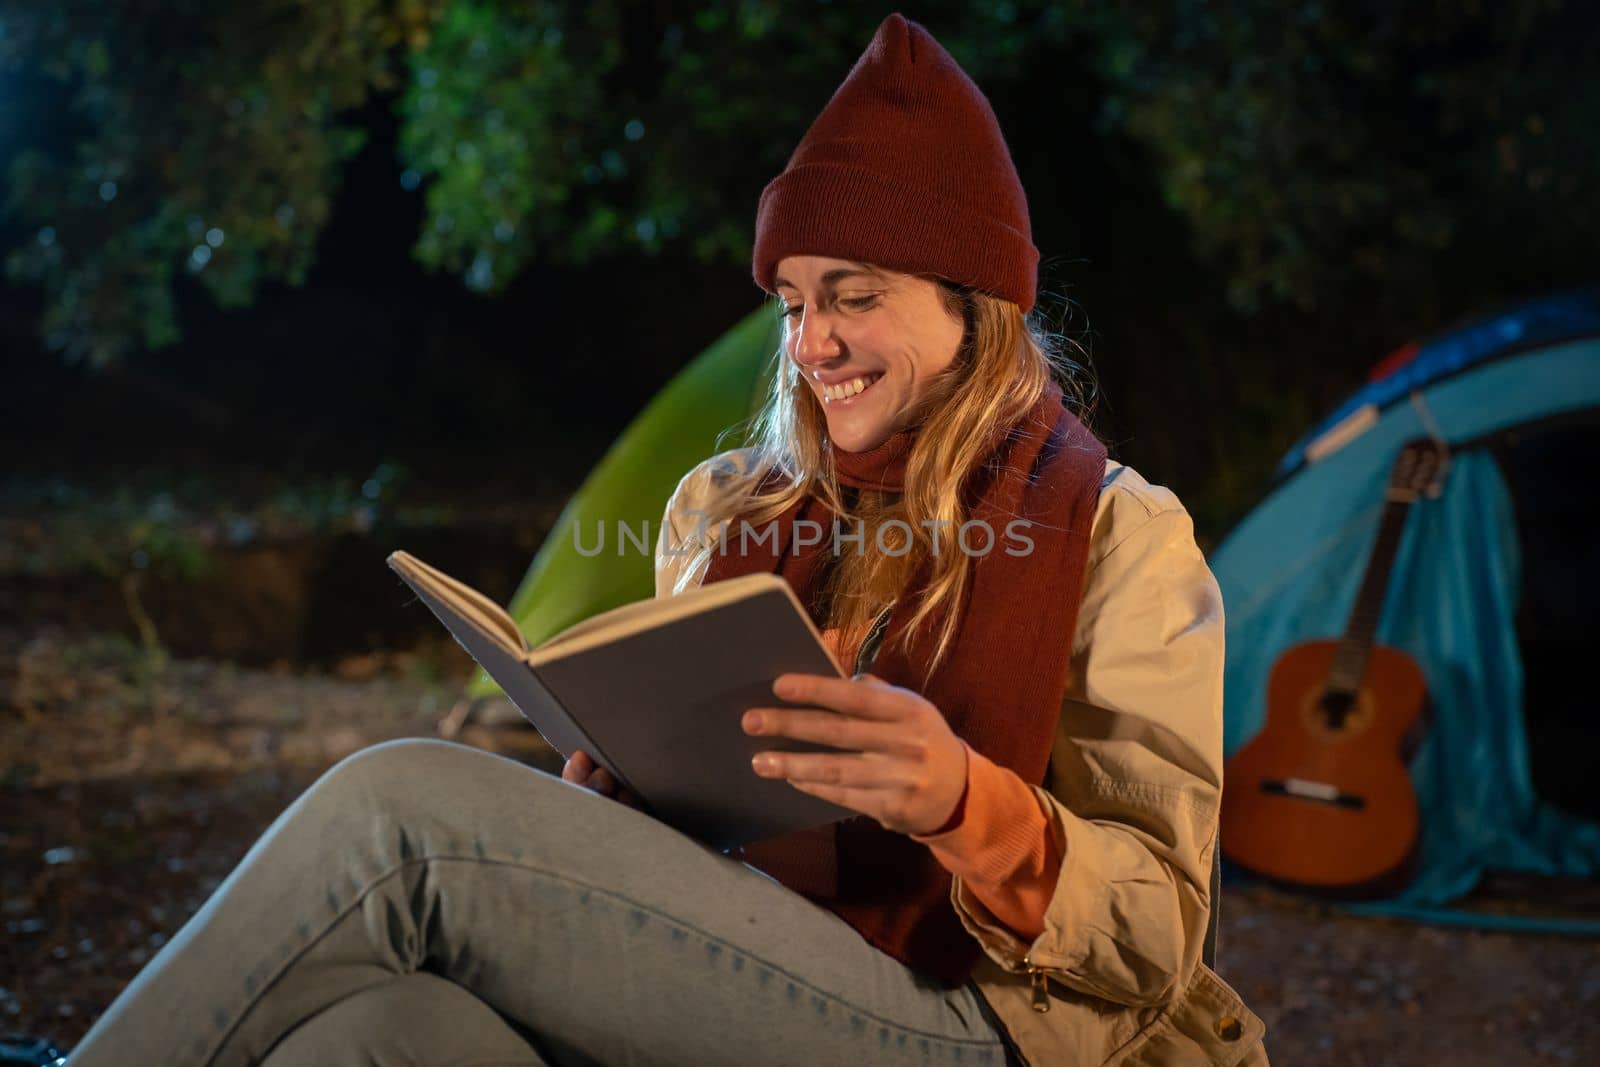 Girl reading a book at night camping. Night scene next to camping fire. Relaxing in quiet nature by PaulCarr